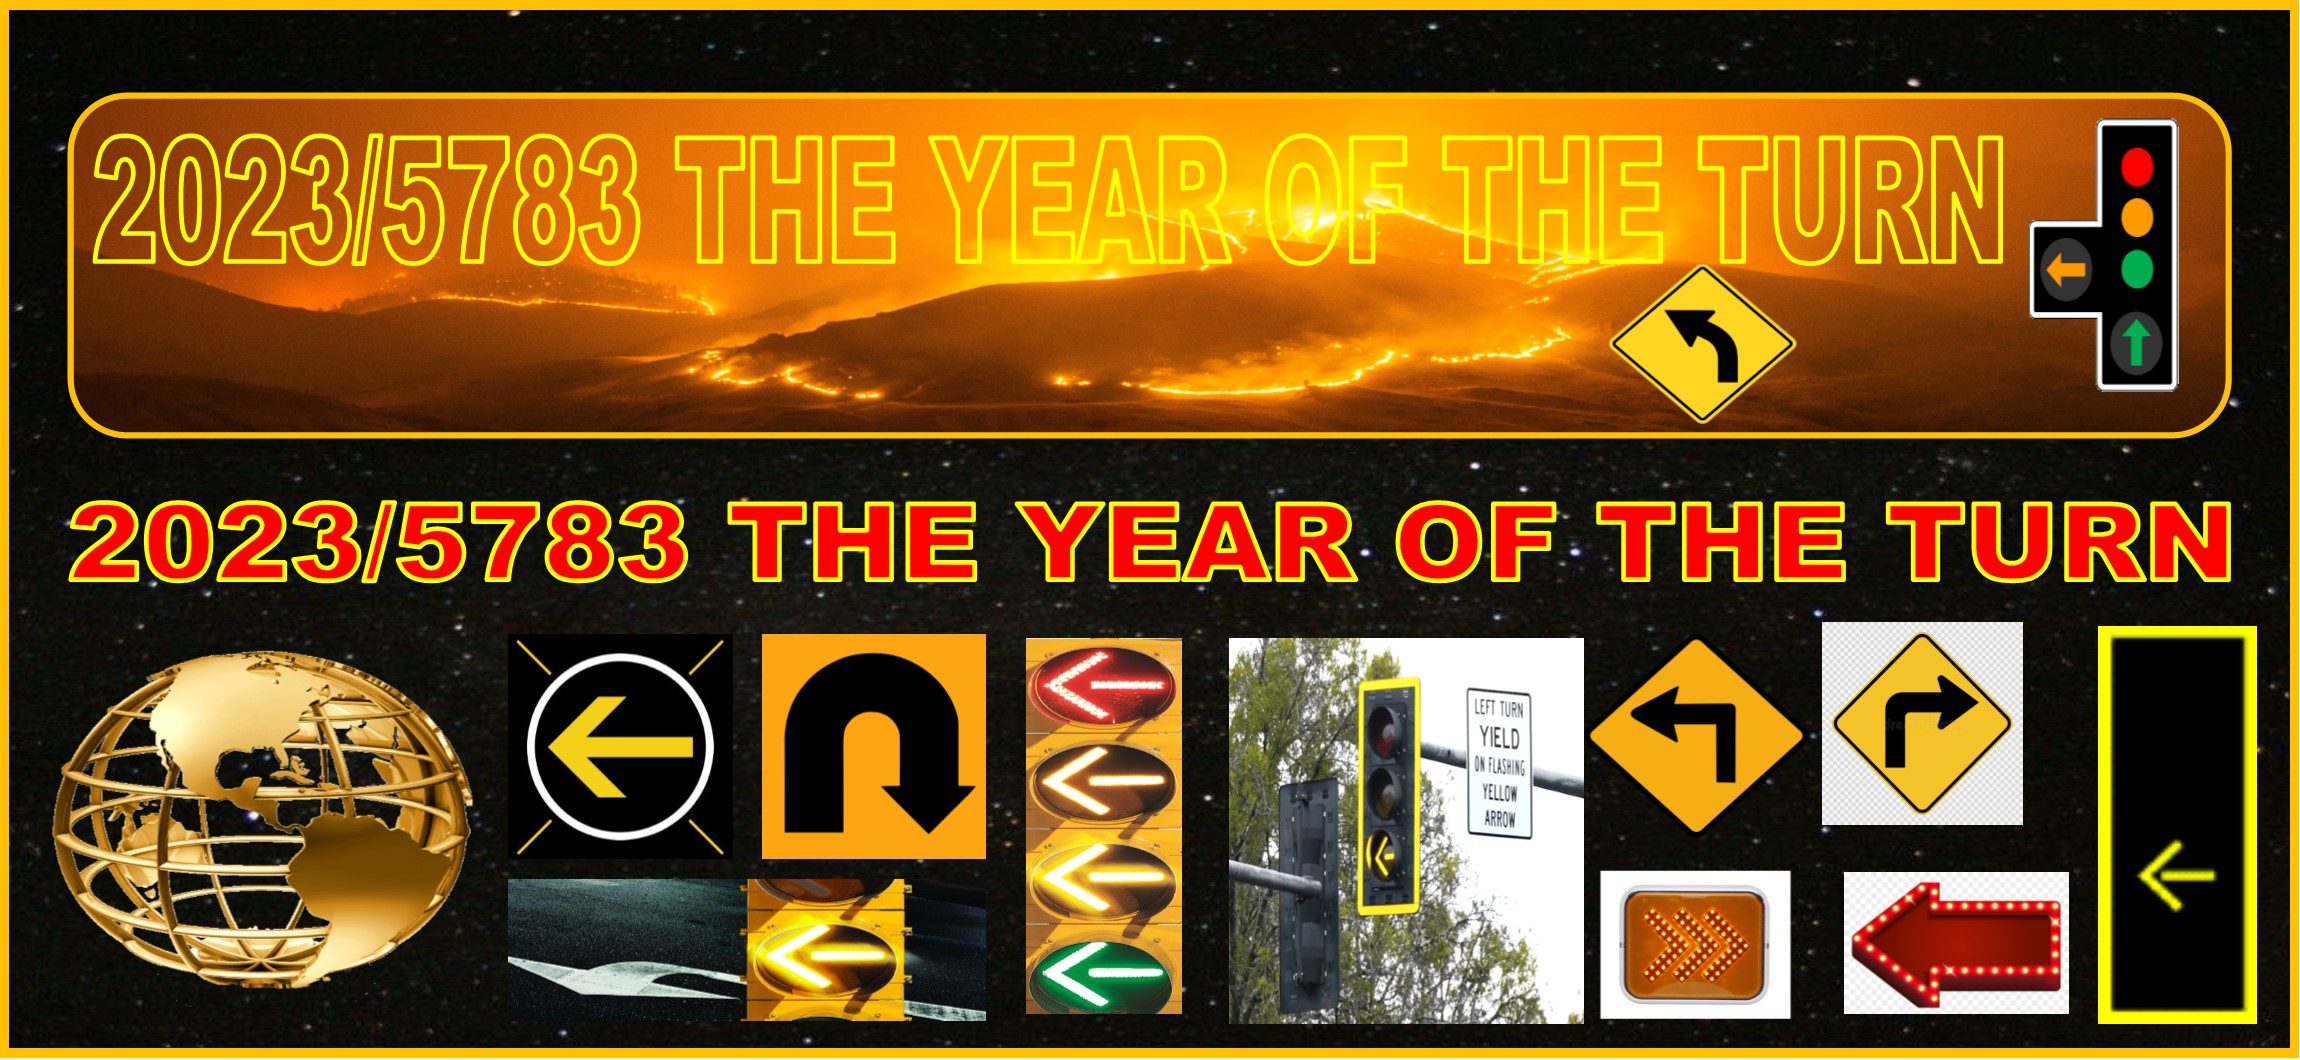 2023-5783 THE YEAR OF THE TURN WEBSITE HEADER 11-15-2022